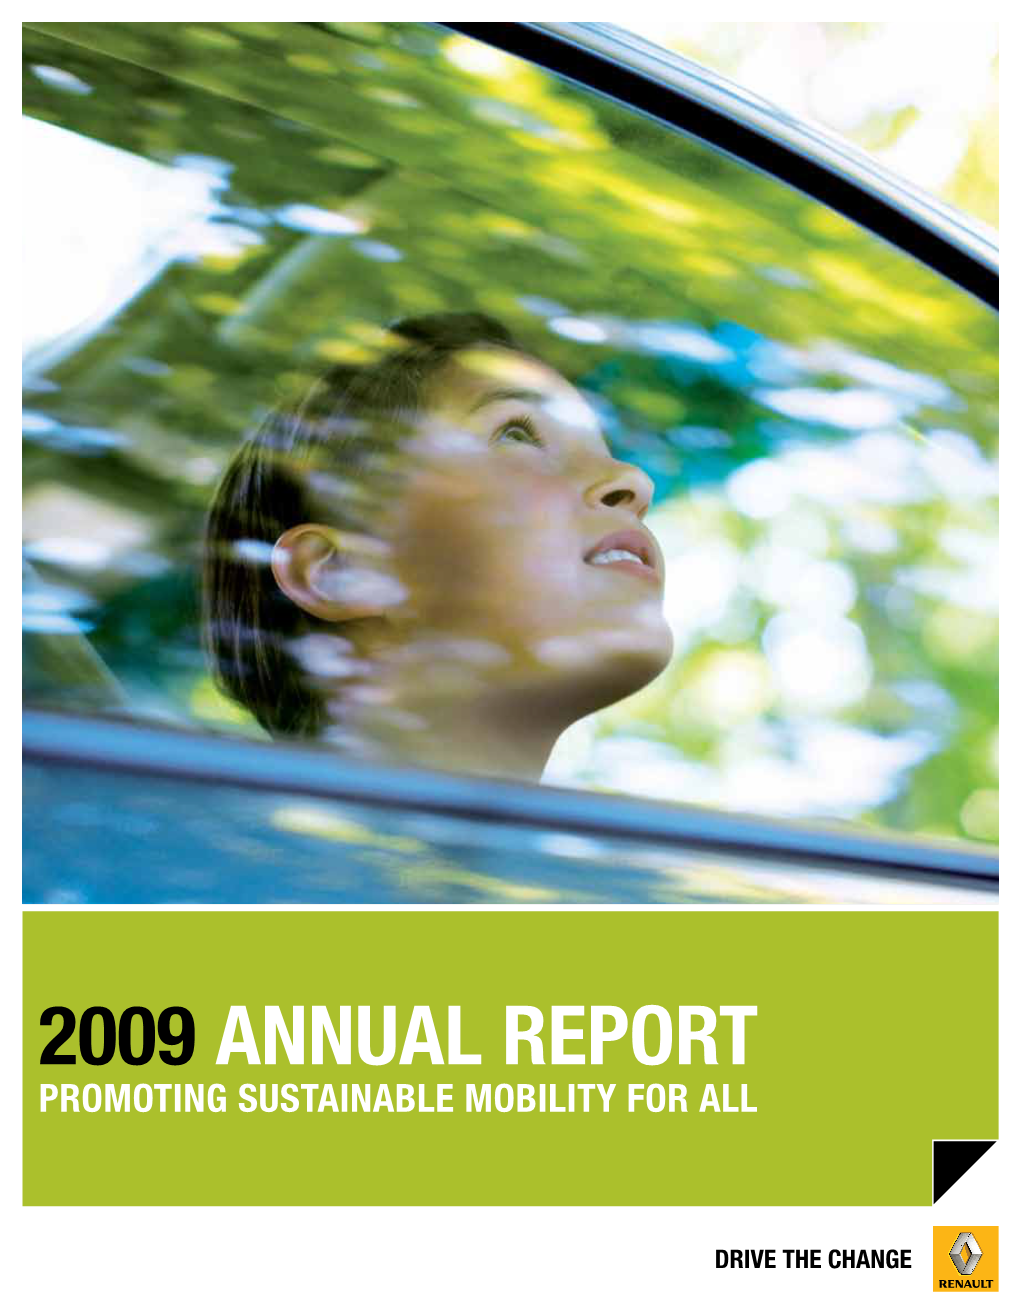 2009 ANNUAL REPORT Promoting Sustainable Mobility for All Contents 0 1 2 3 4 2009 CONTENTS KEY FIGURES *